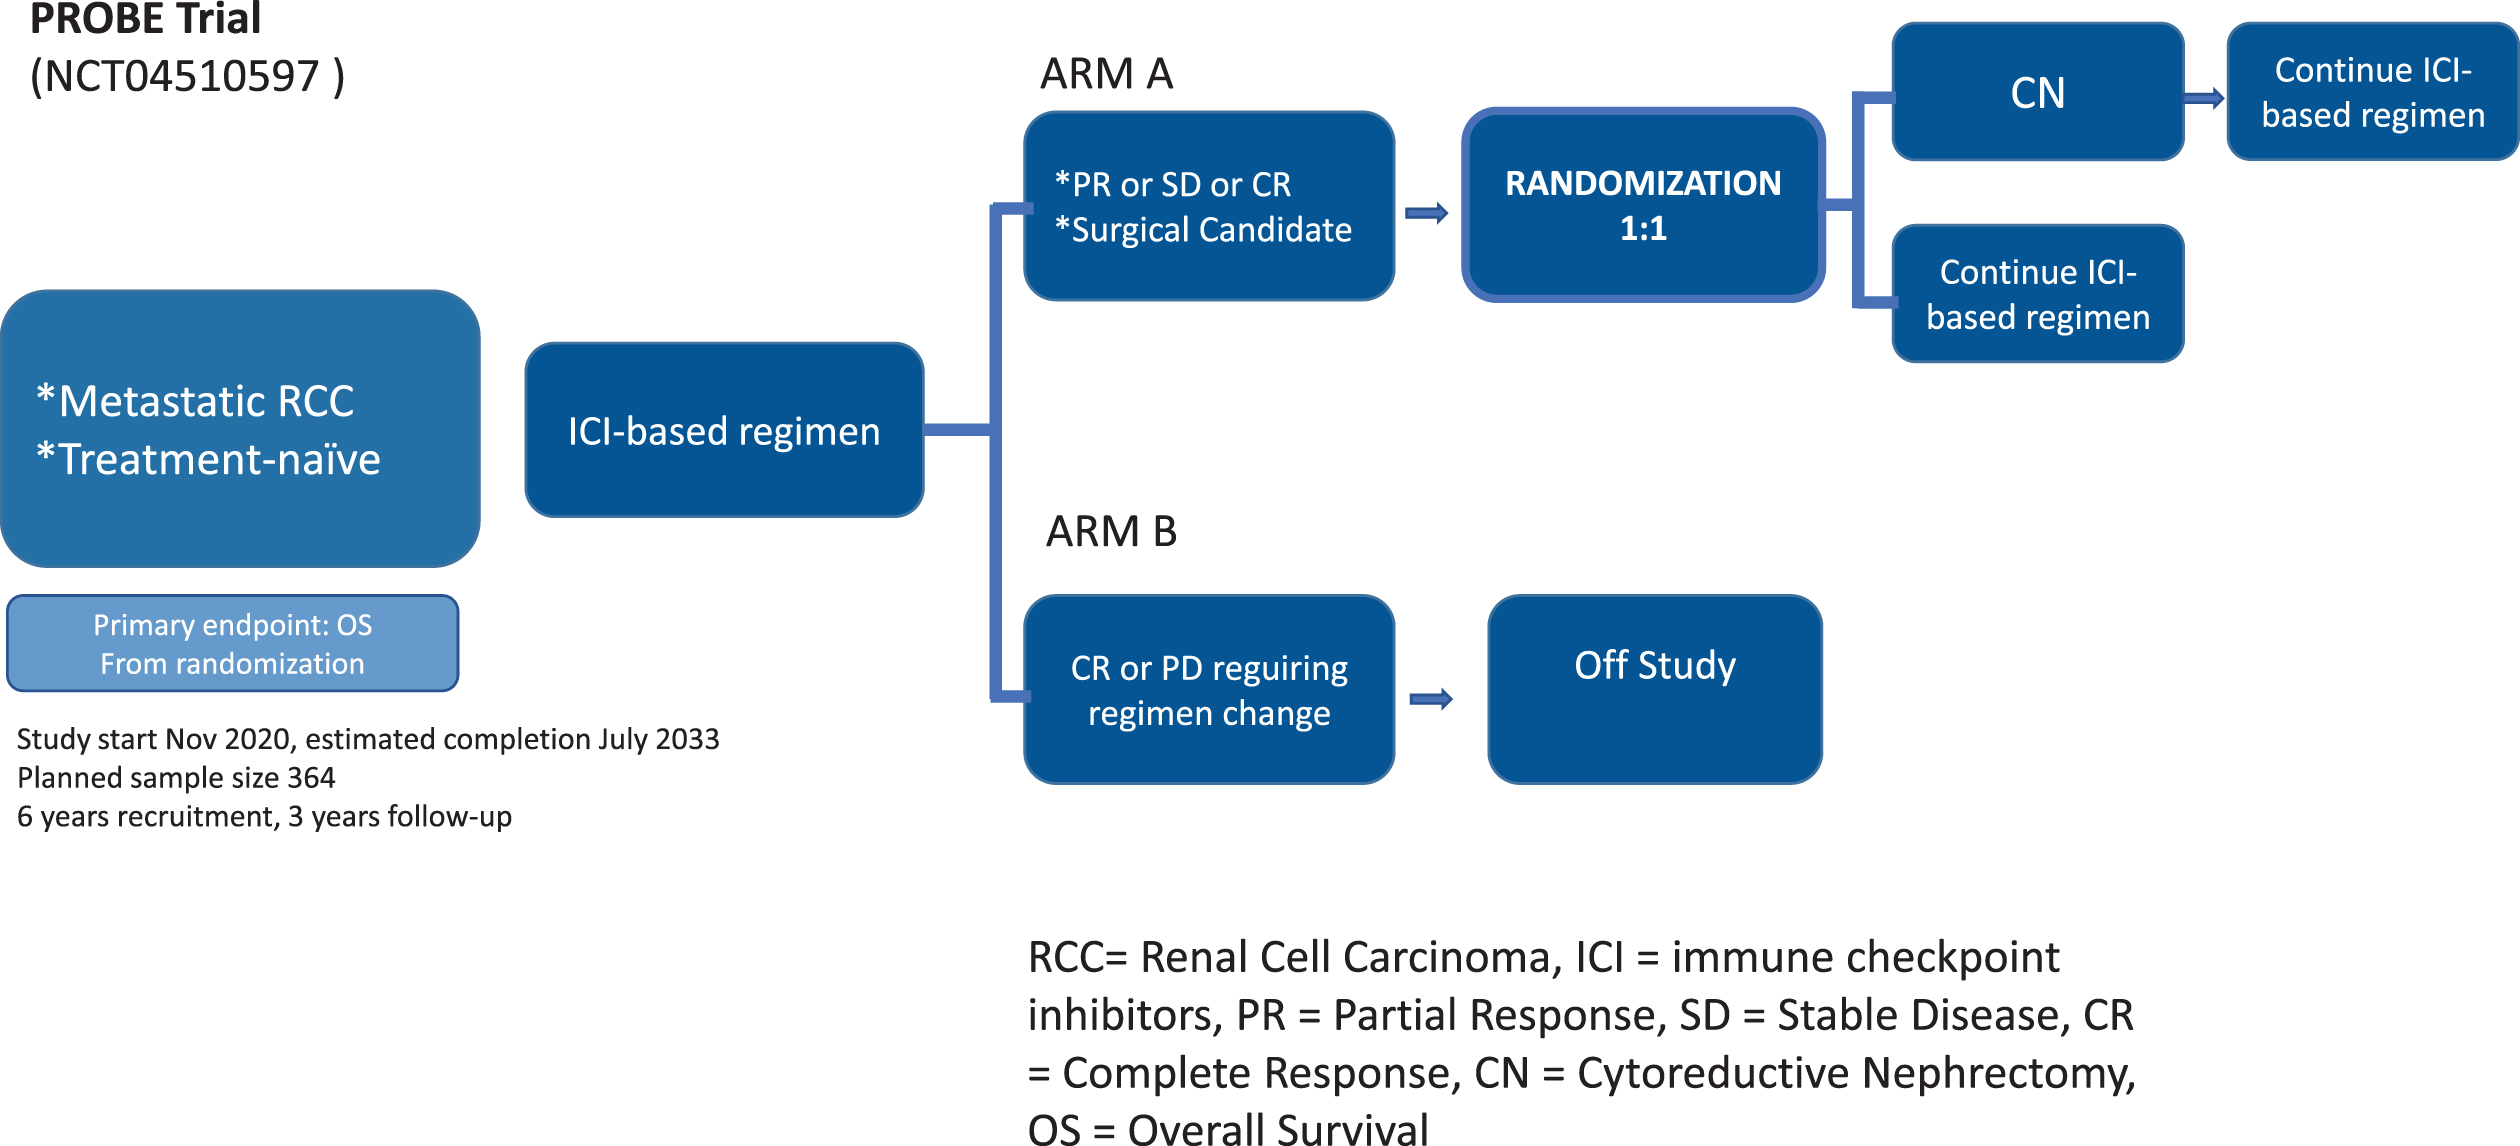 The design of the PROBE Trial. Studies any U.S. FDA-regulated ICI combination.